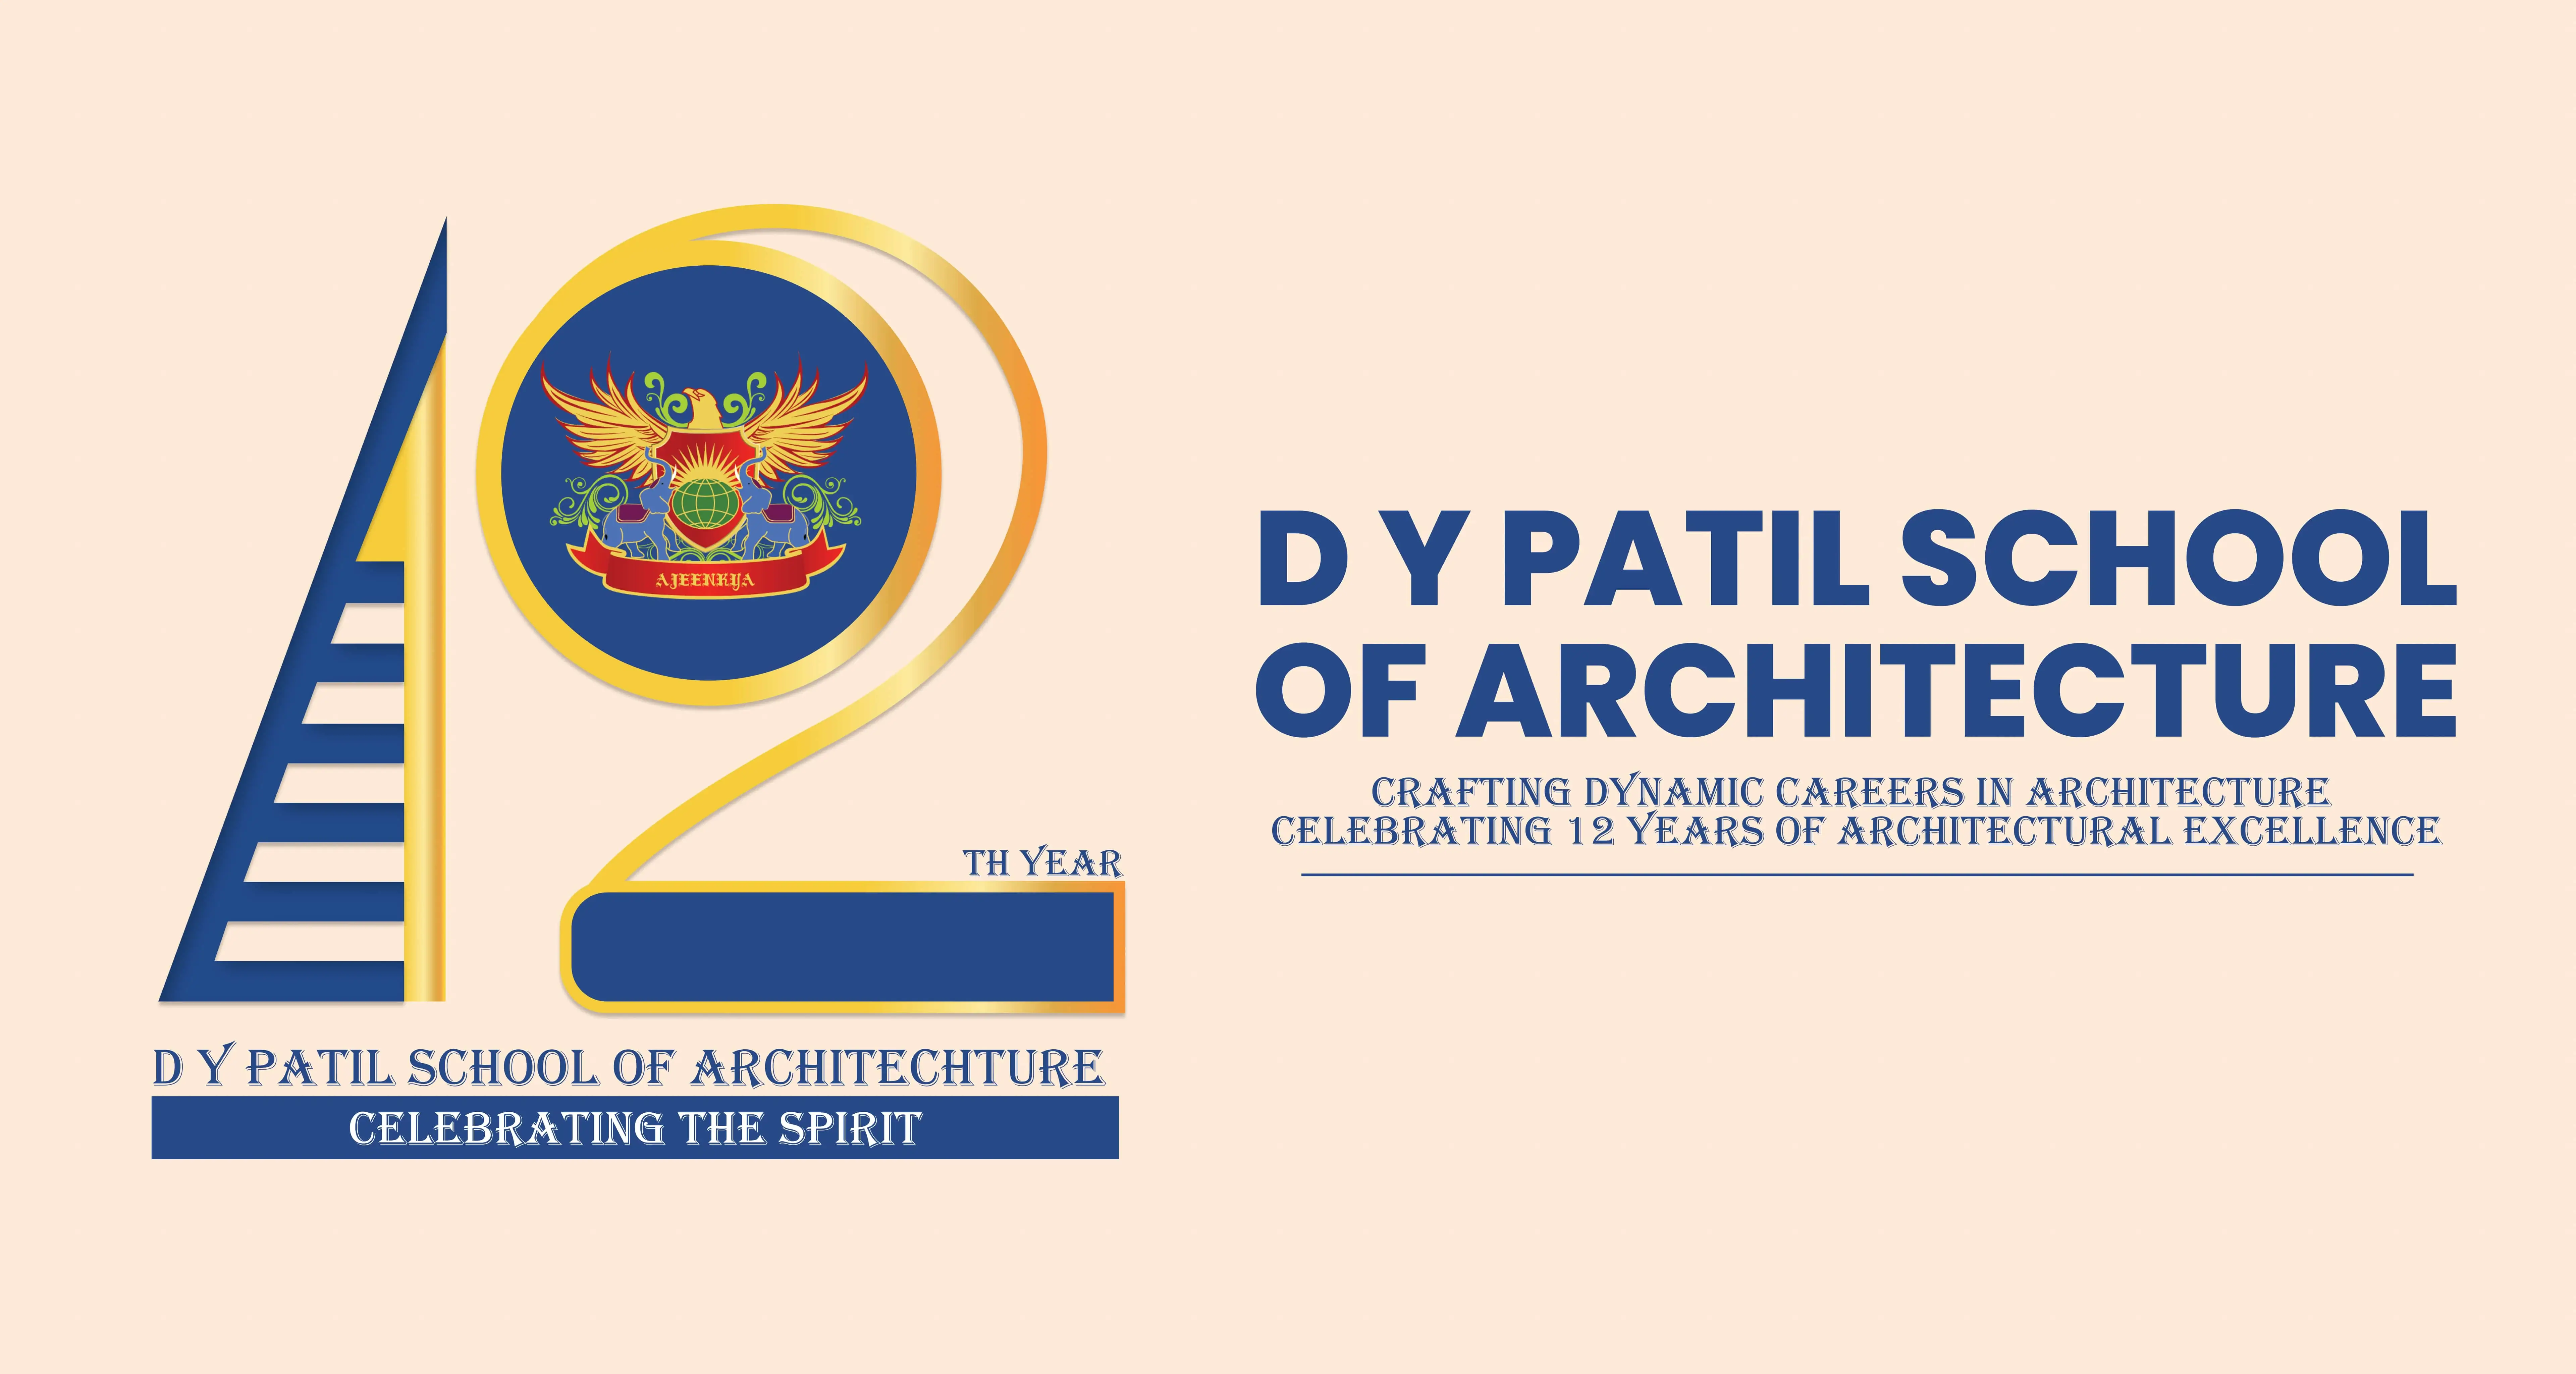 12th year, celebrating the sprit, D Y Patil School of Architecture, Lonegaon